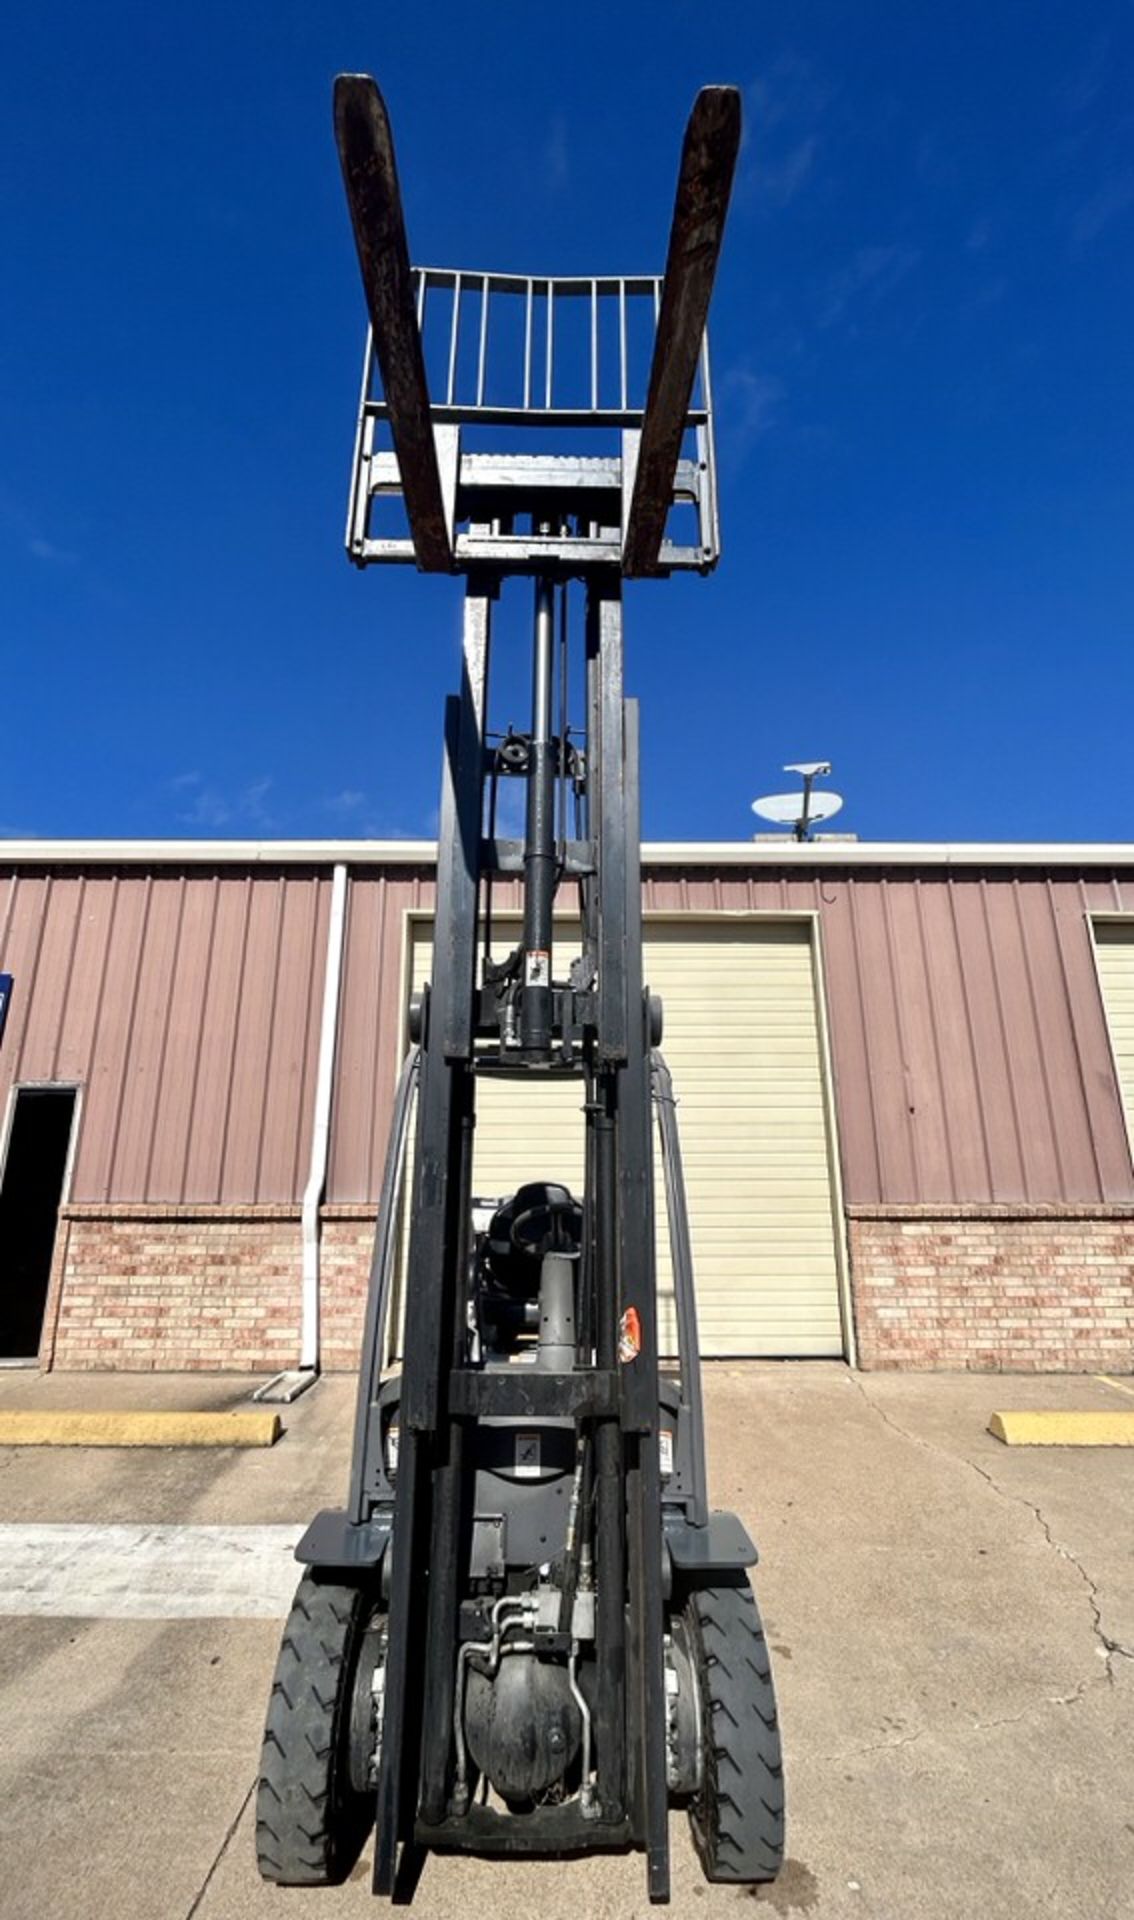 2017 Crown 5,000 lbs Forkift, 3 Stage Mast, Pneumatic Tires, Hours Shown: 576 - Image 6 of 12